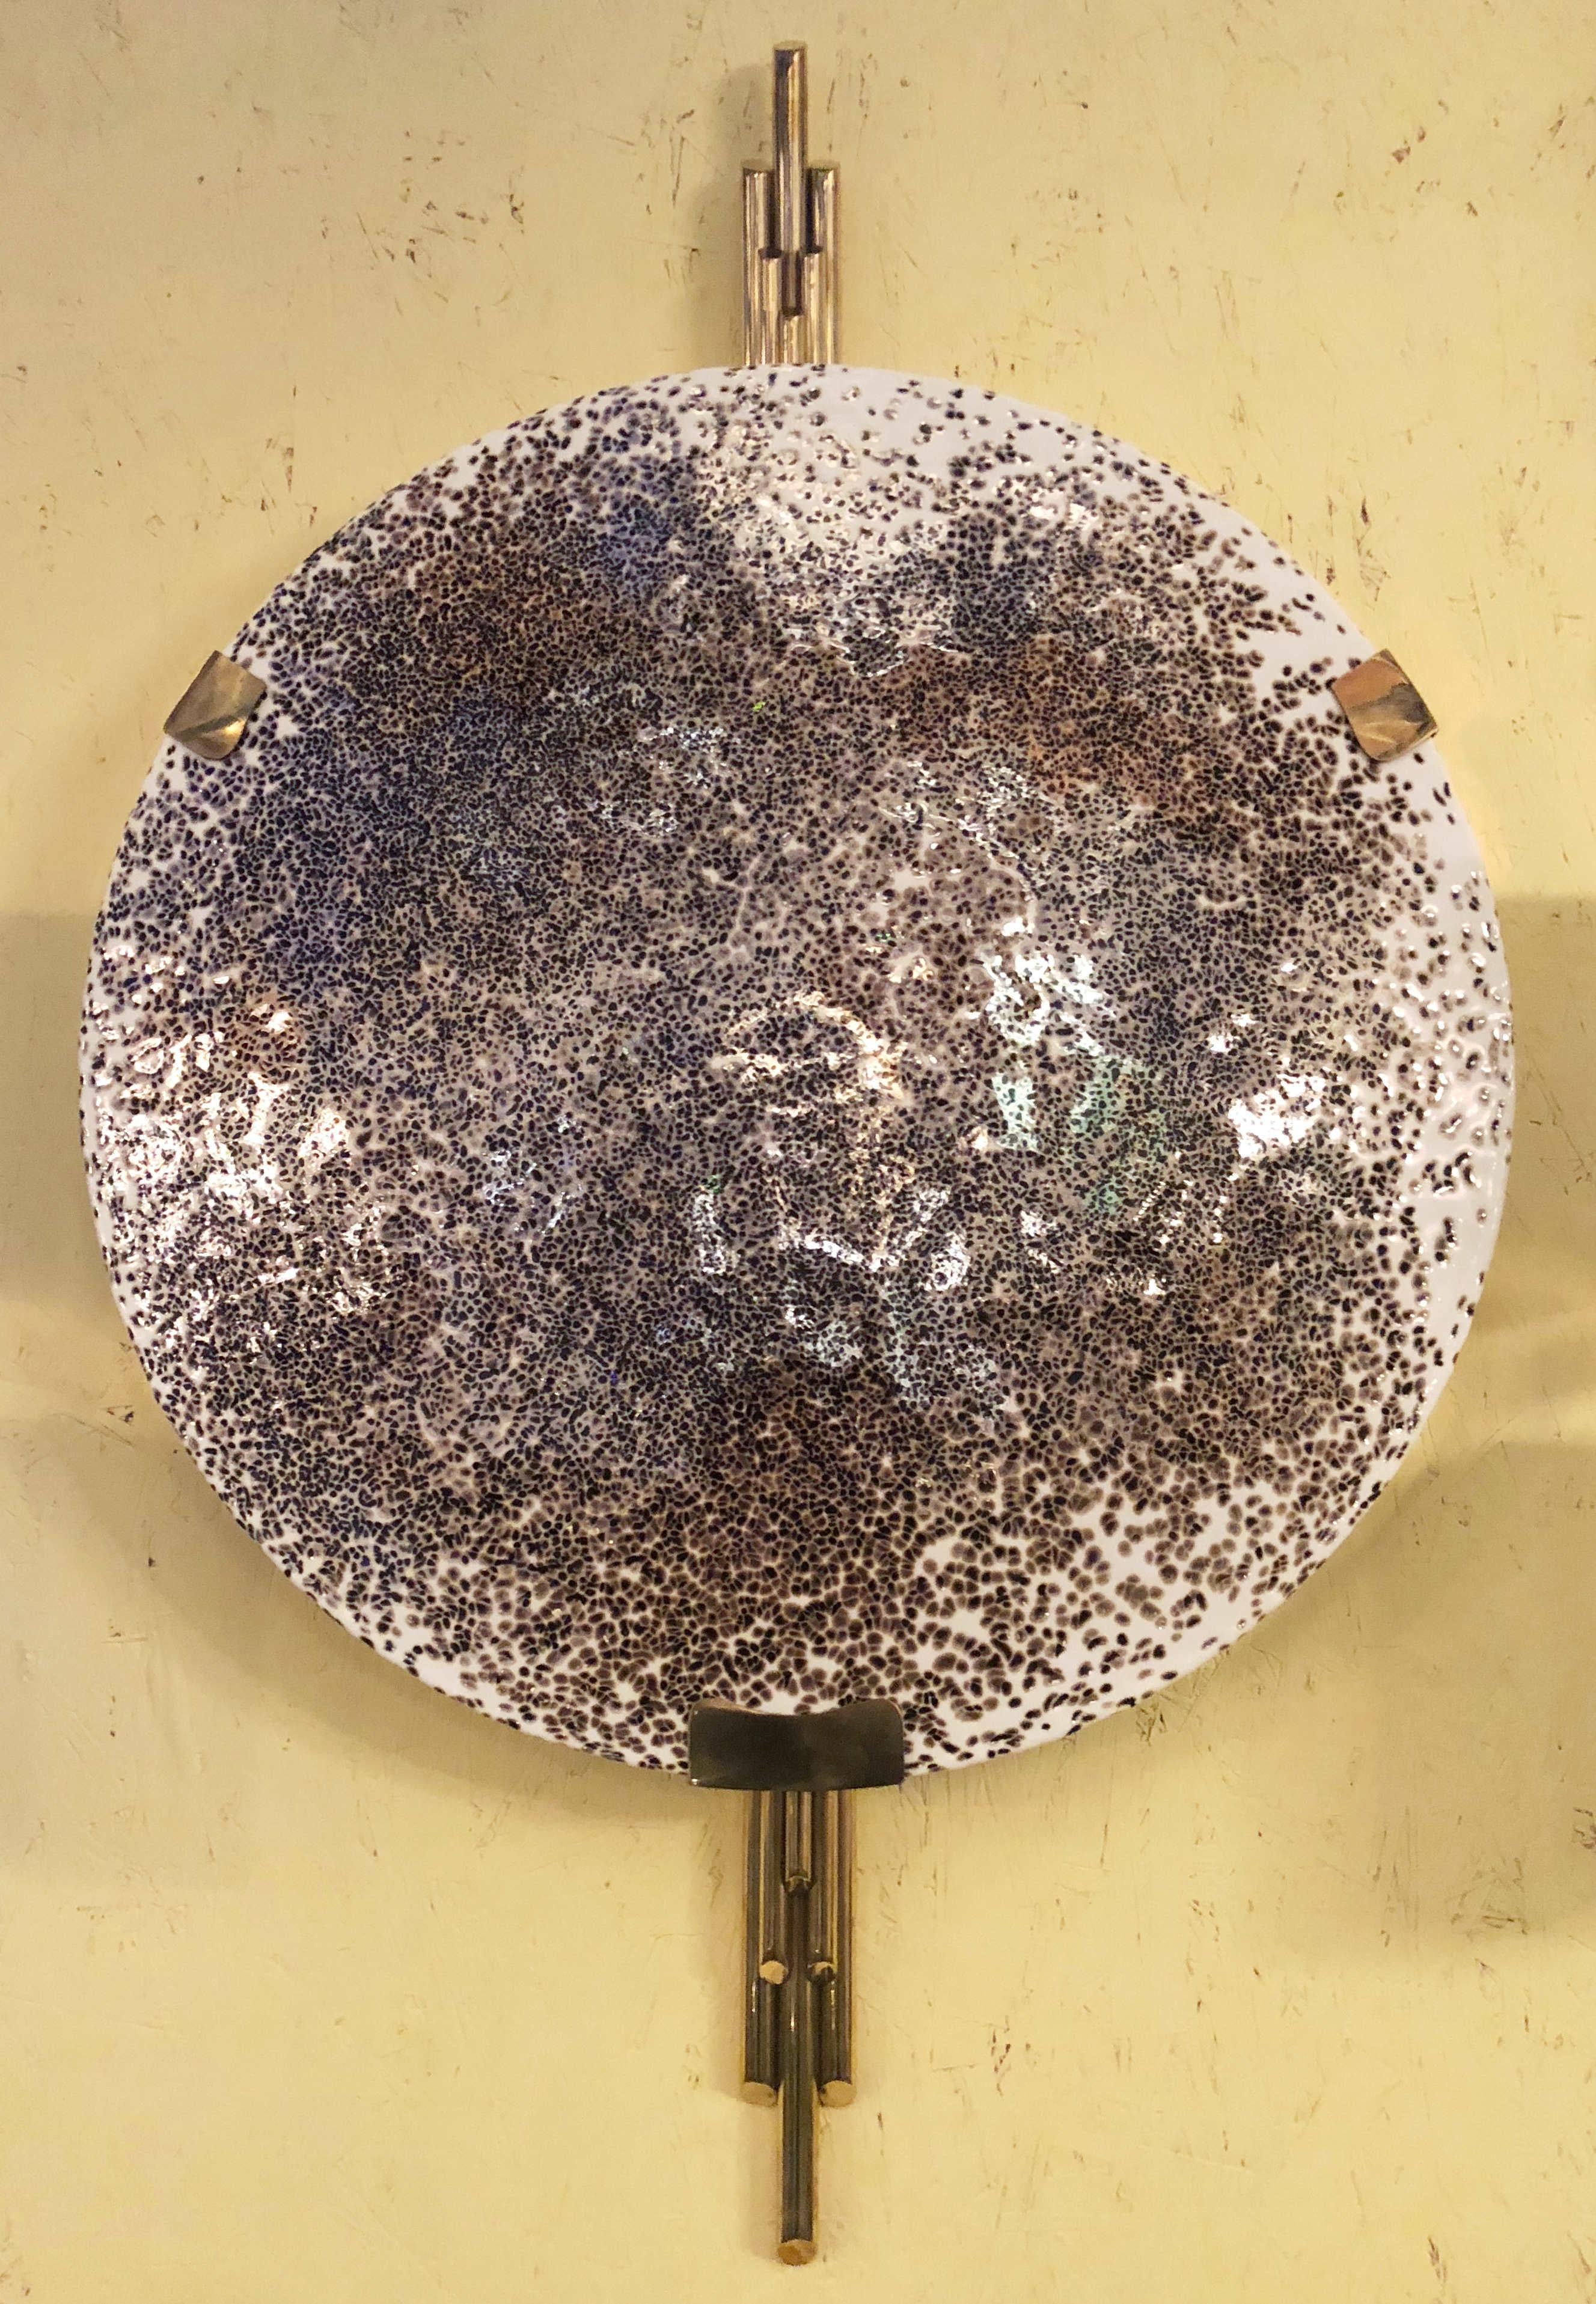 One of a kind Italian Art Deco inspired wall light or flush mount with a large decorative round Murano glass shade mounted on brass frame / Designed by Fabio Bergomi for Fabio Ltd / Made in Italy 
6 lights / E12 or E14 type / max 40W each
Height: 46